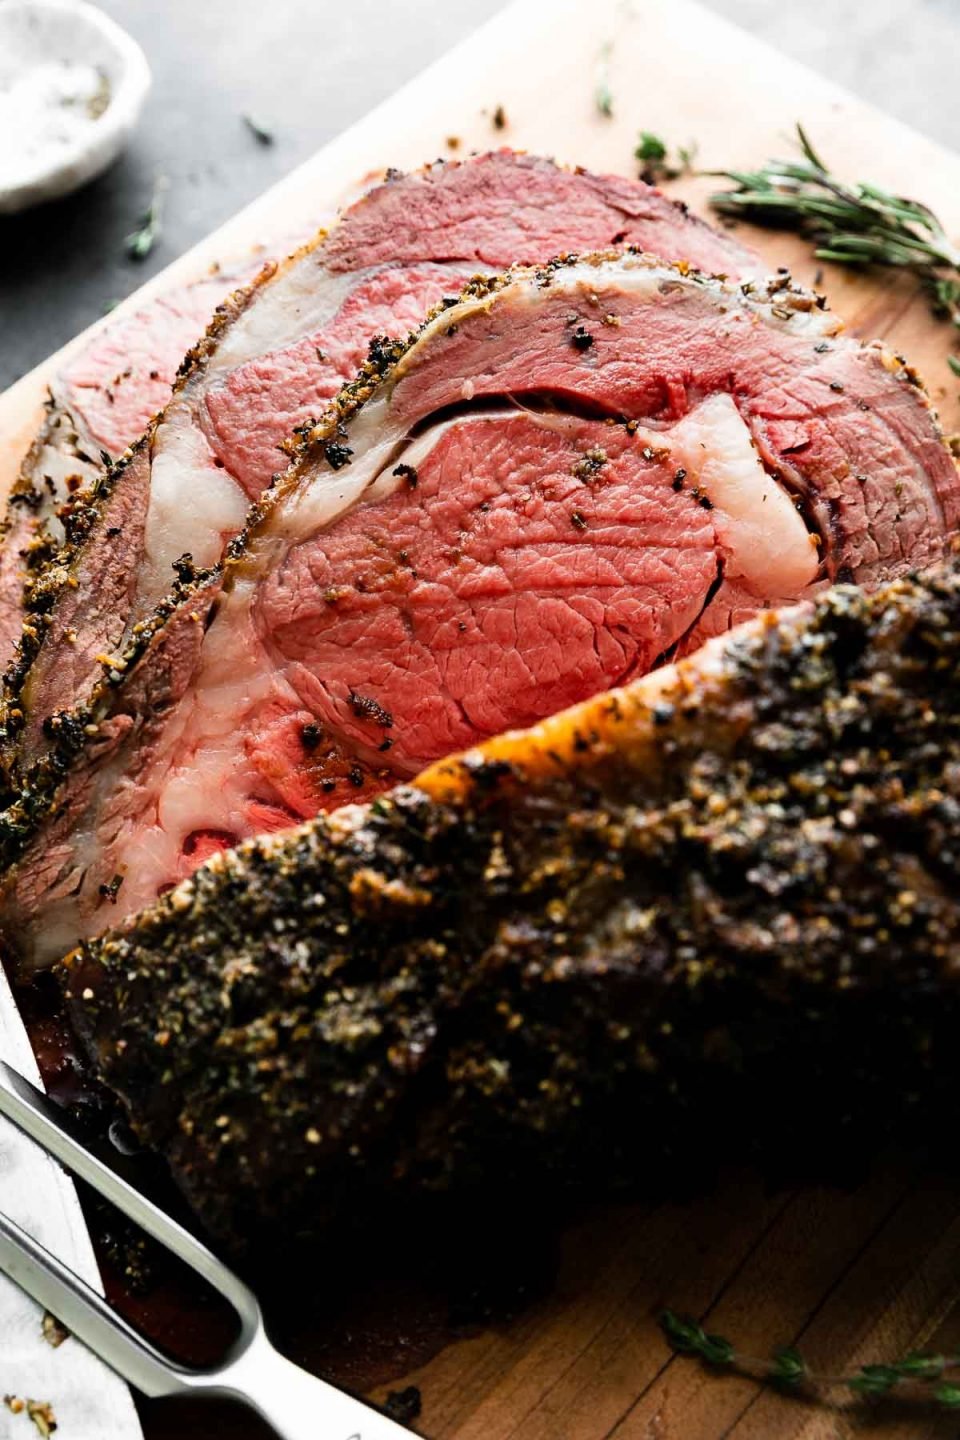 A side angle shot of roasted and partially carved medium-rare Prime Rib covered in a Garlic Herb Rub that sits atop a wooden cutting board. Fresh herbs, a sharp kitchen knife, and a carving fork surround the roast and rest alongside on the cutting board. The cutting board rests atop a dark textured surface with a black and white plaid linen napkin and a pinch bowl filled with kosher salt surrounding the cutting board.